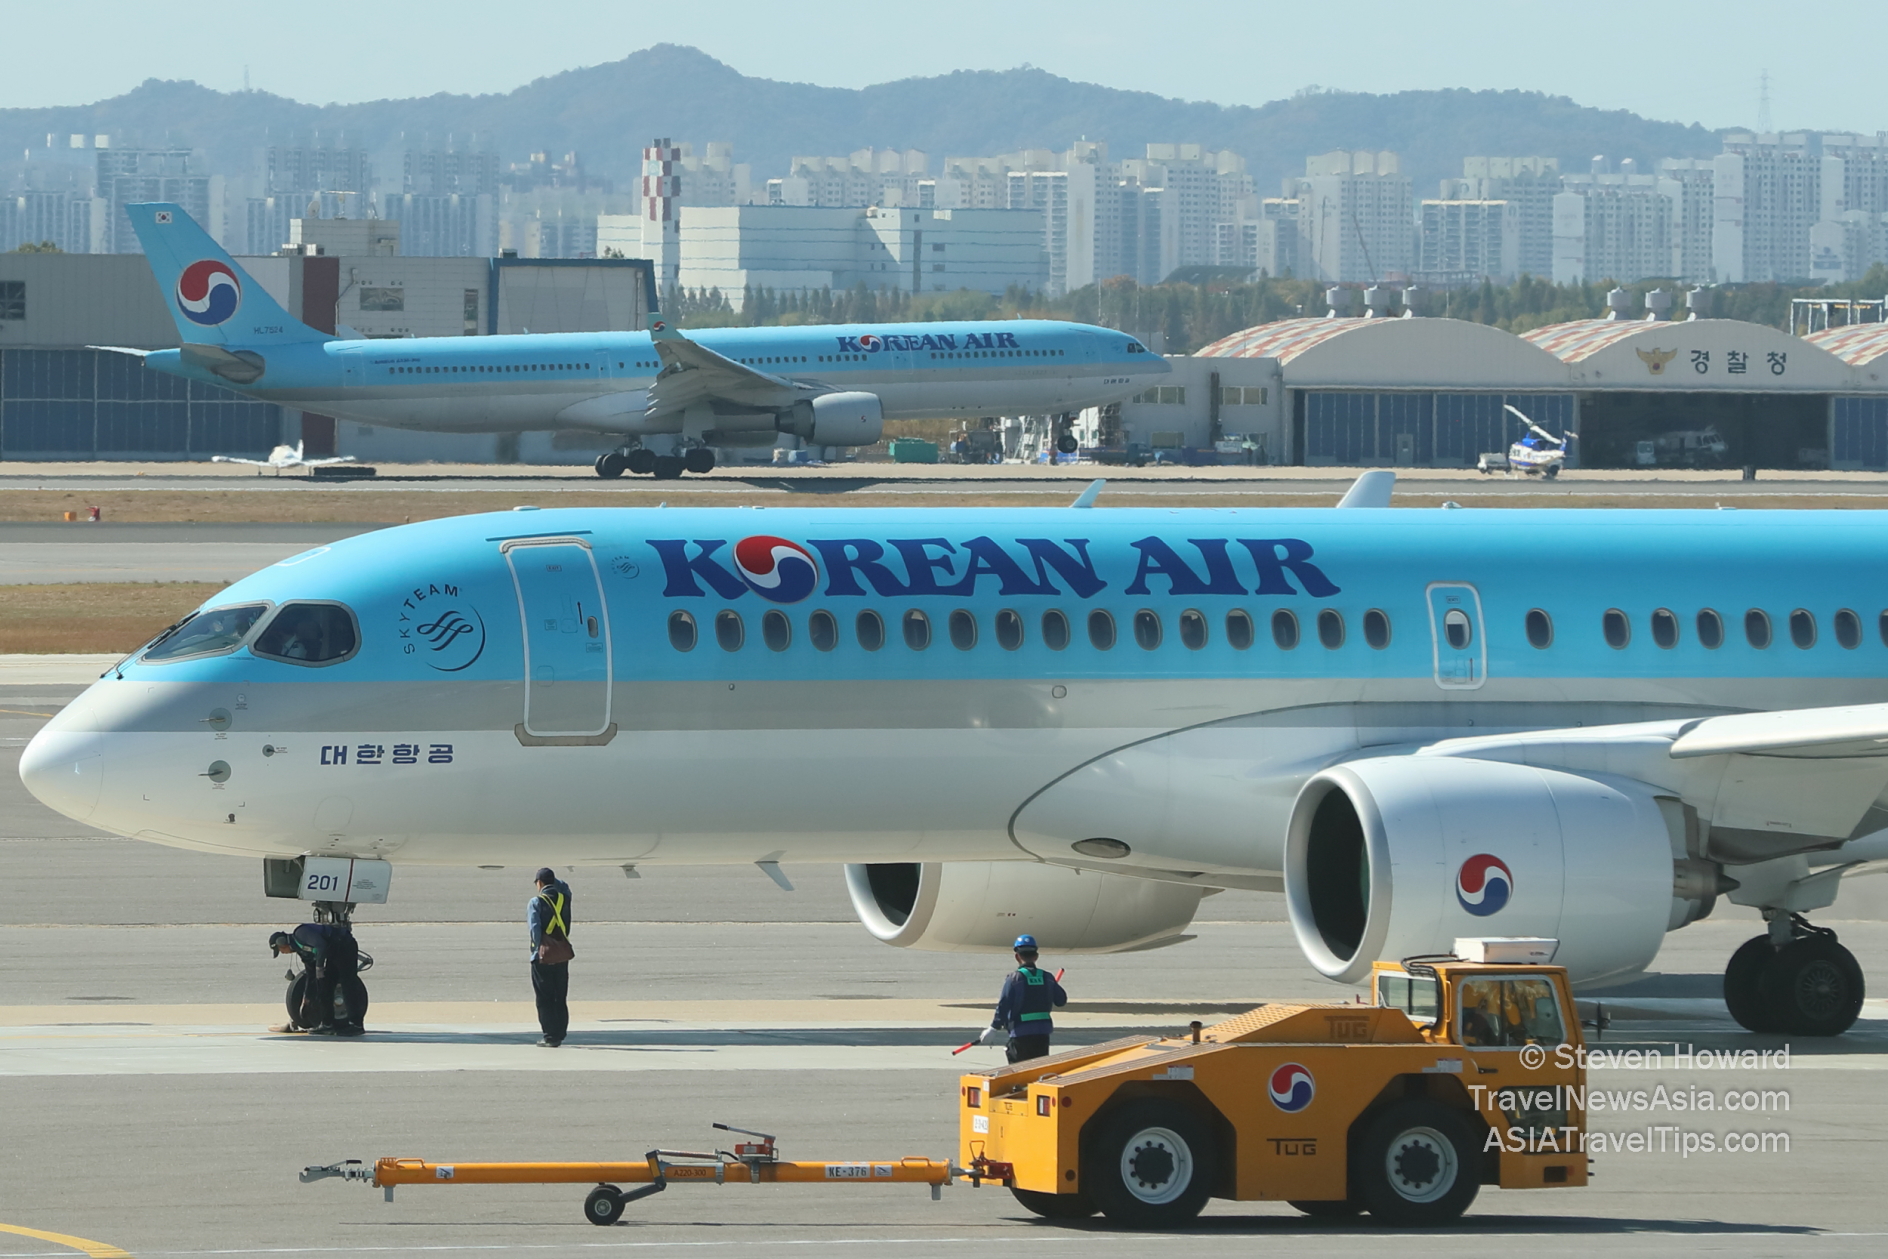 Korean Air A220-300 and A330. Picture by Steven Howard of TravelNewsAsia.com Click to enlarge.